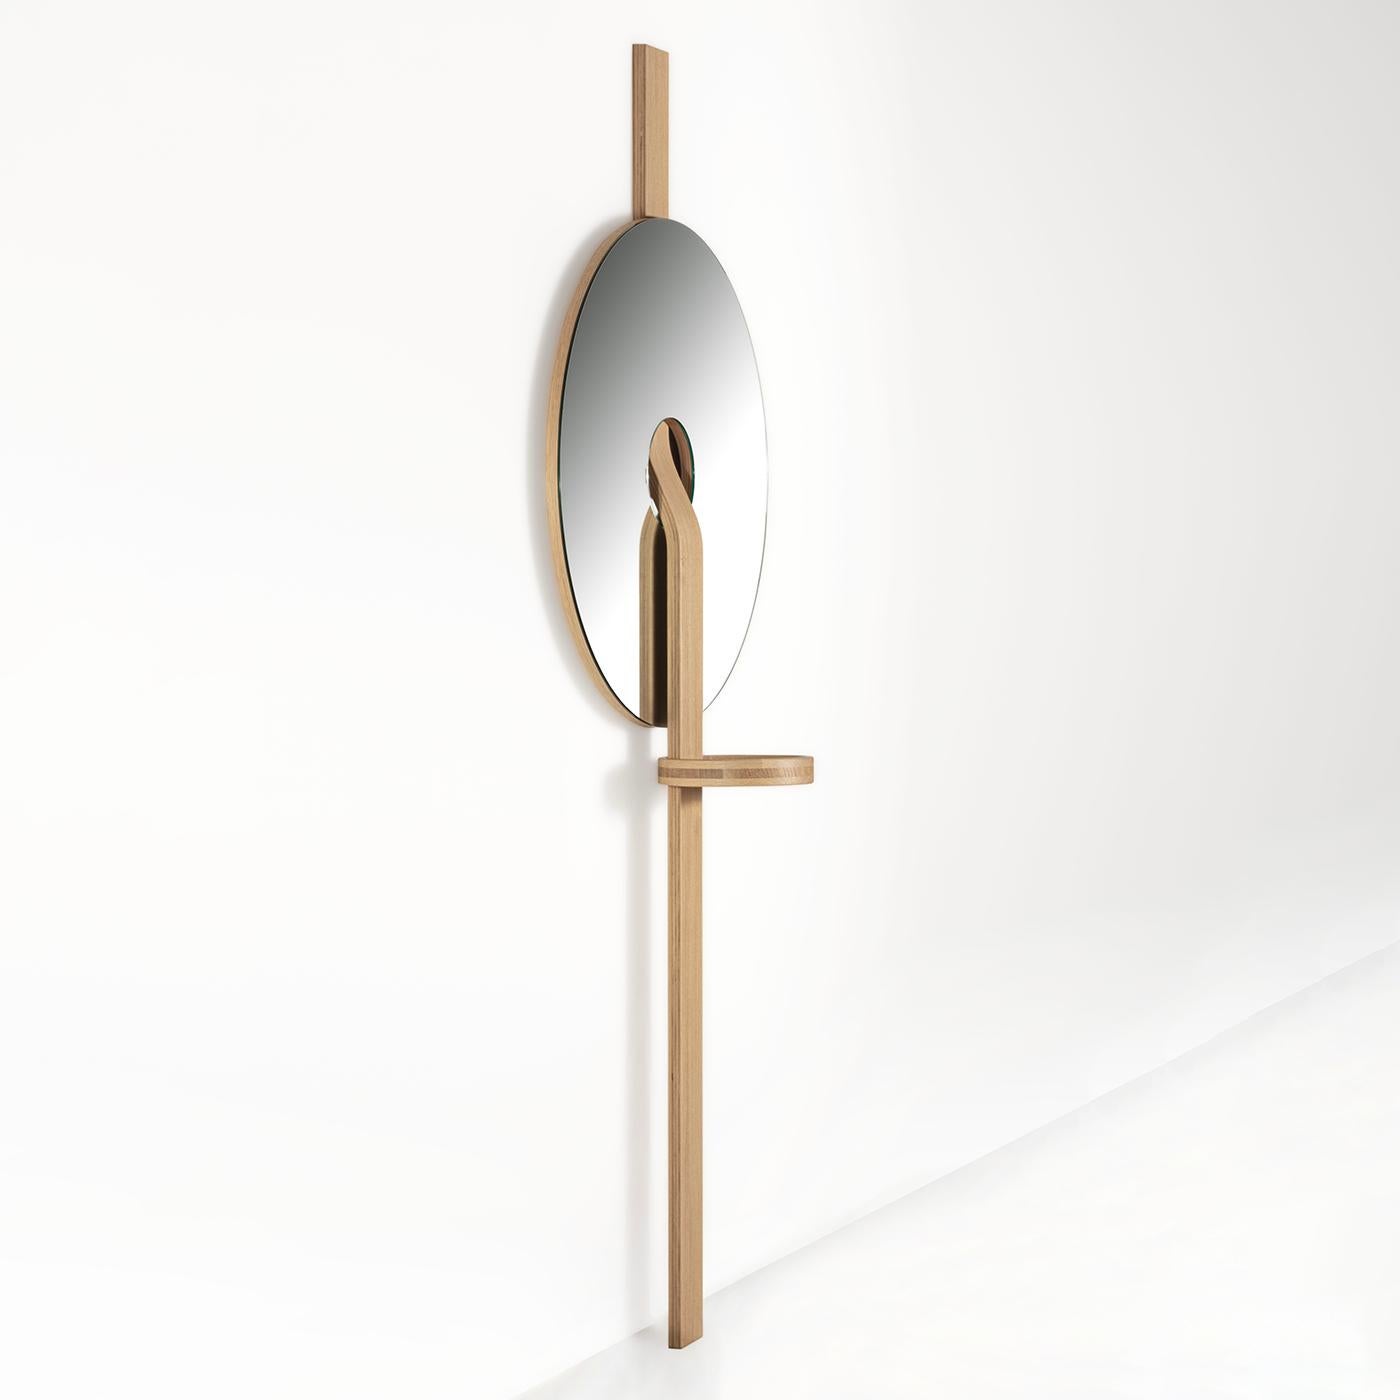 A natural addition to contemporary decors, this wall mirror stands out for its sculptural aesthetic. A slightly curved structural band in solid durmast pierces the mirrored glass disk, creating a combination of unmistakable geometric inspiration. A